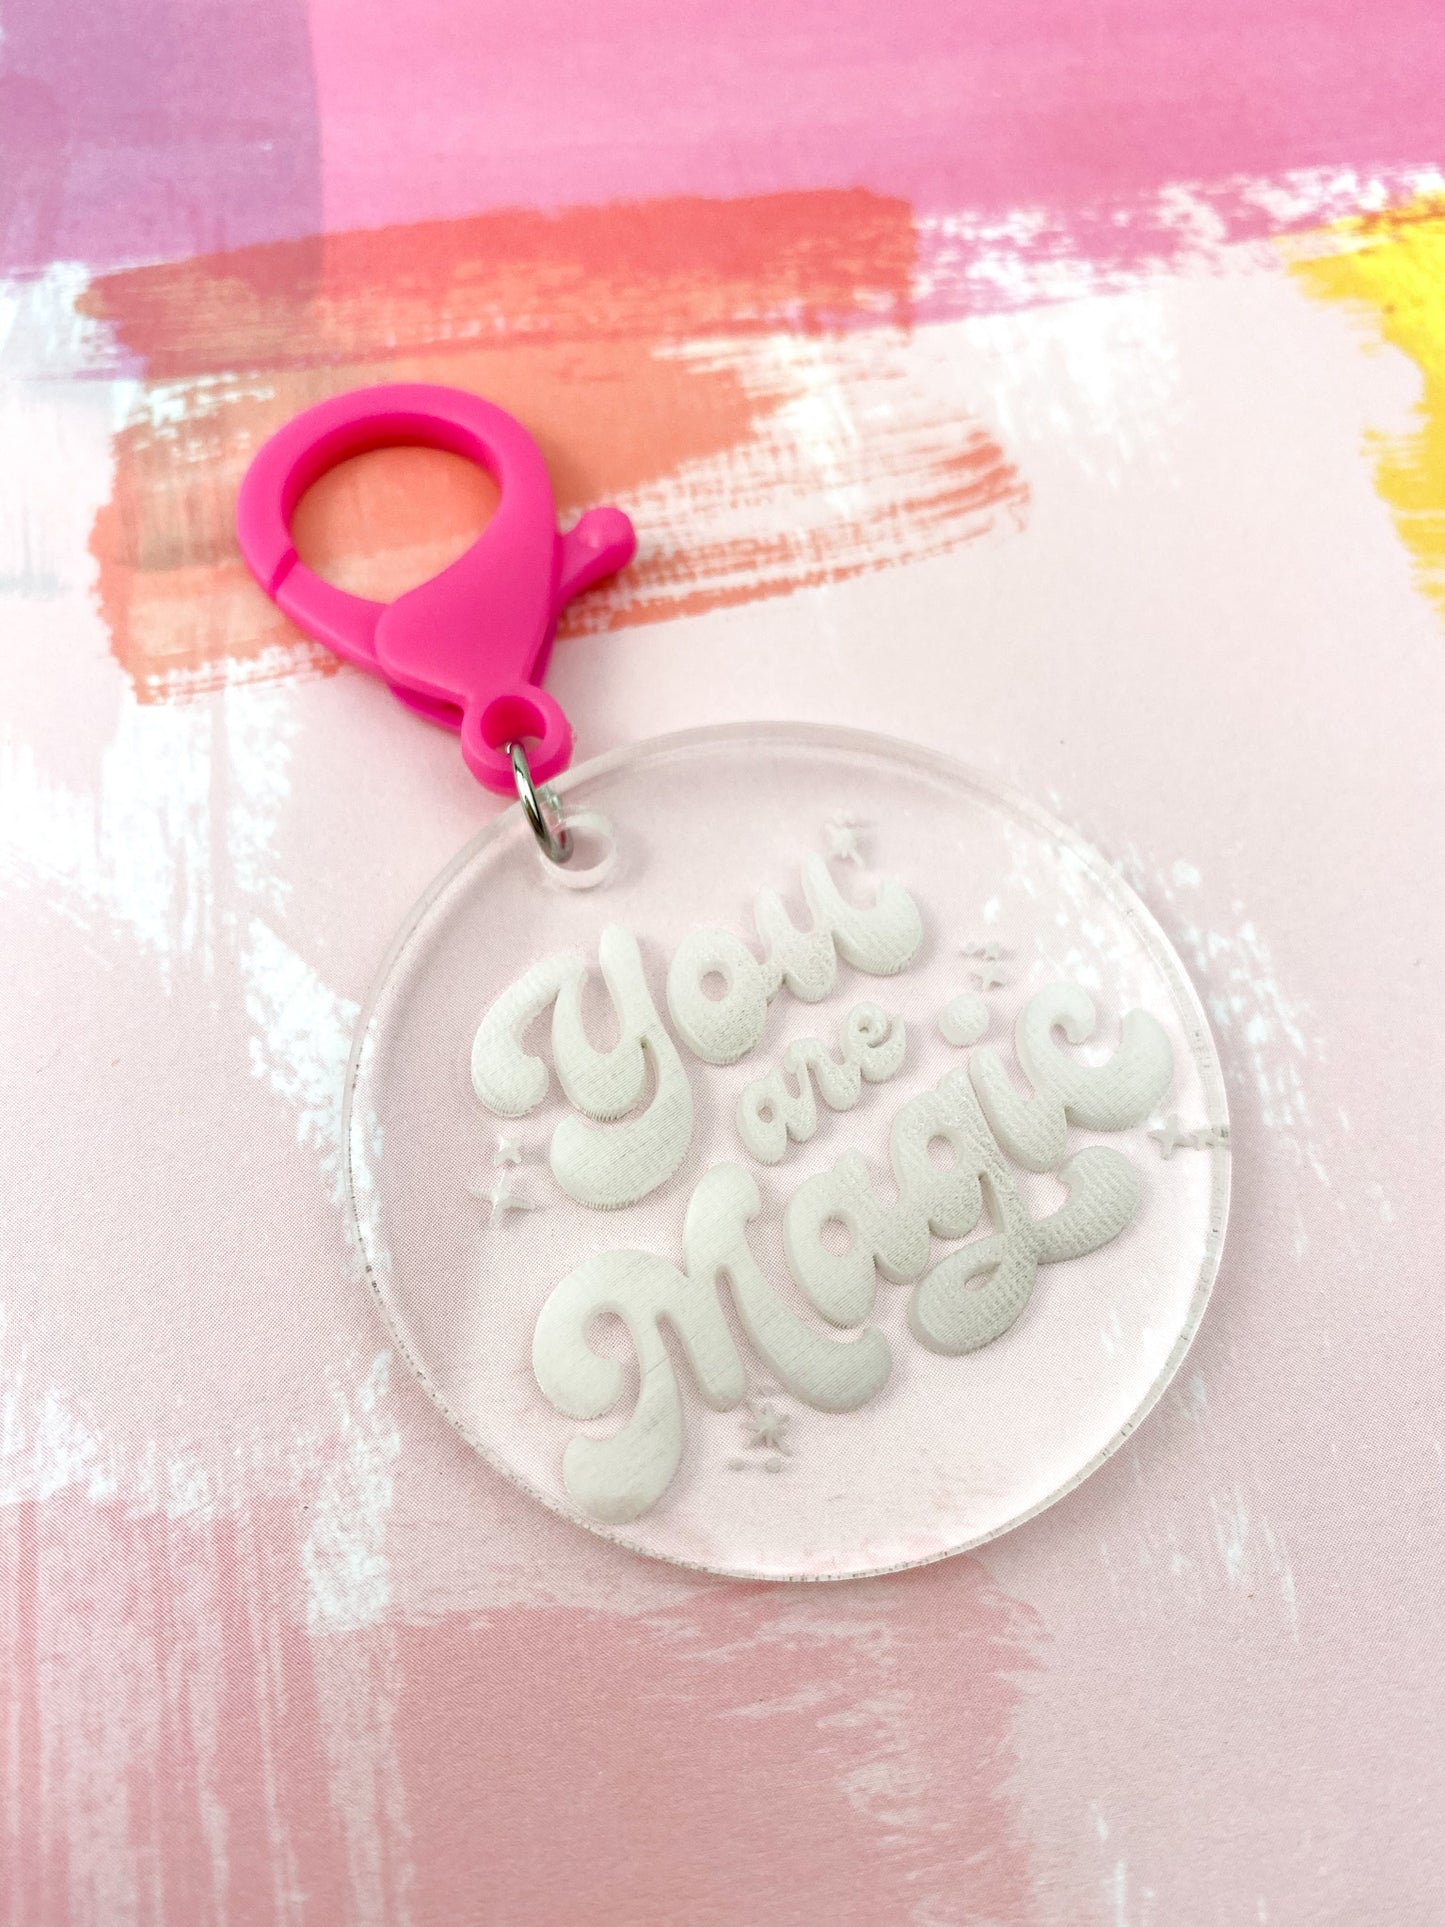 You are Magic (3D Keychain)